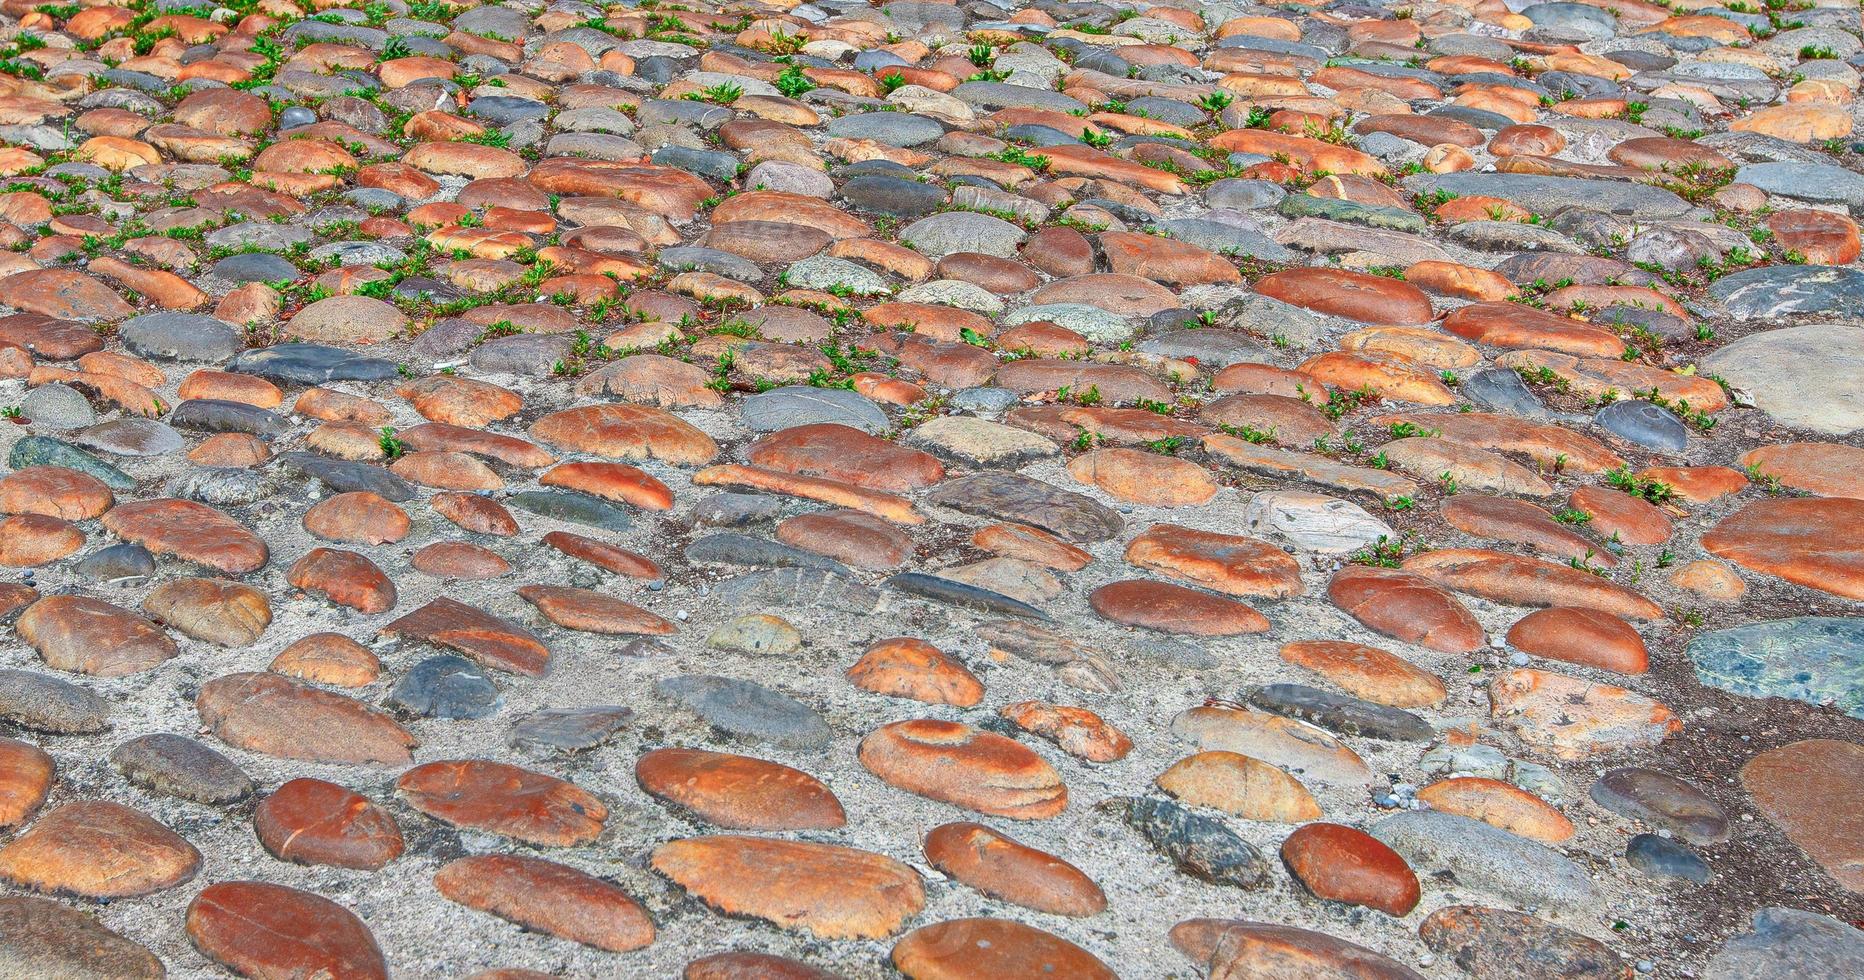 Cobbled, ancient city of stone road. Stone road texture photo